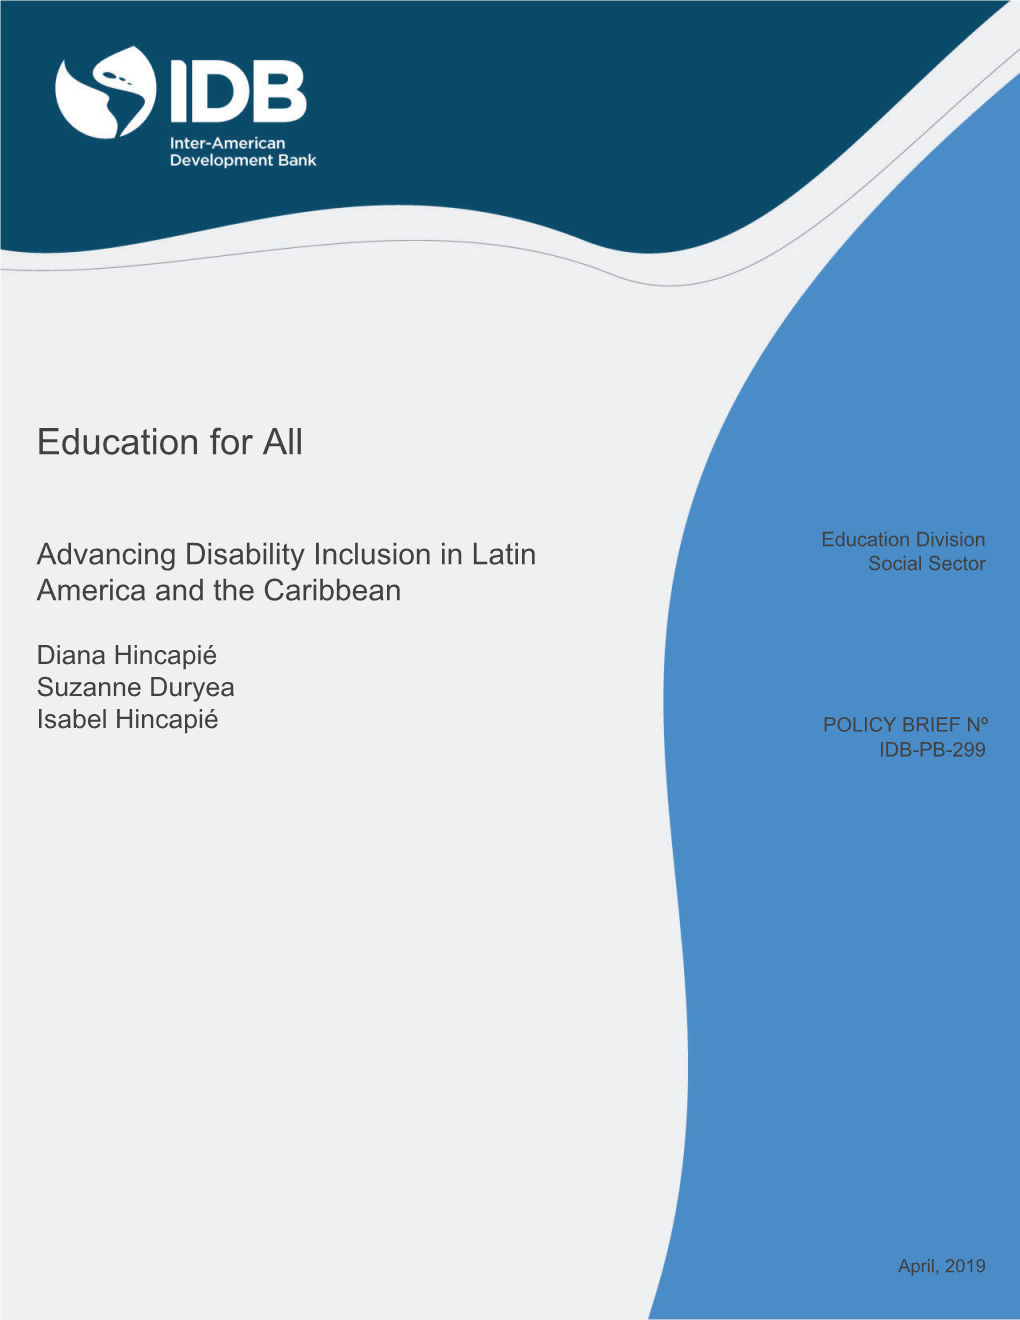 Education for All: Advancing Disability Inclusion in LAC / Diana Hincapie, Suzanne Duryea and Isabel Hincapie